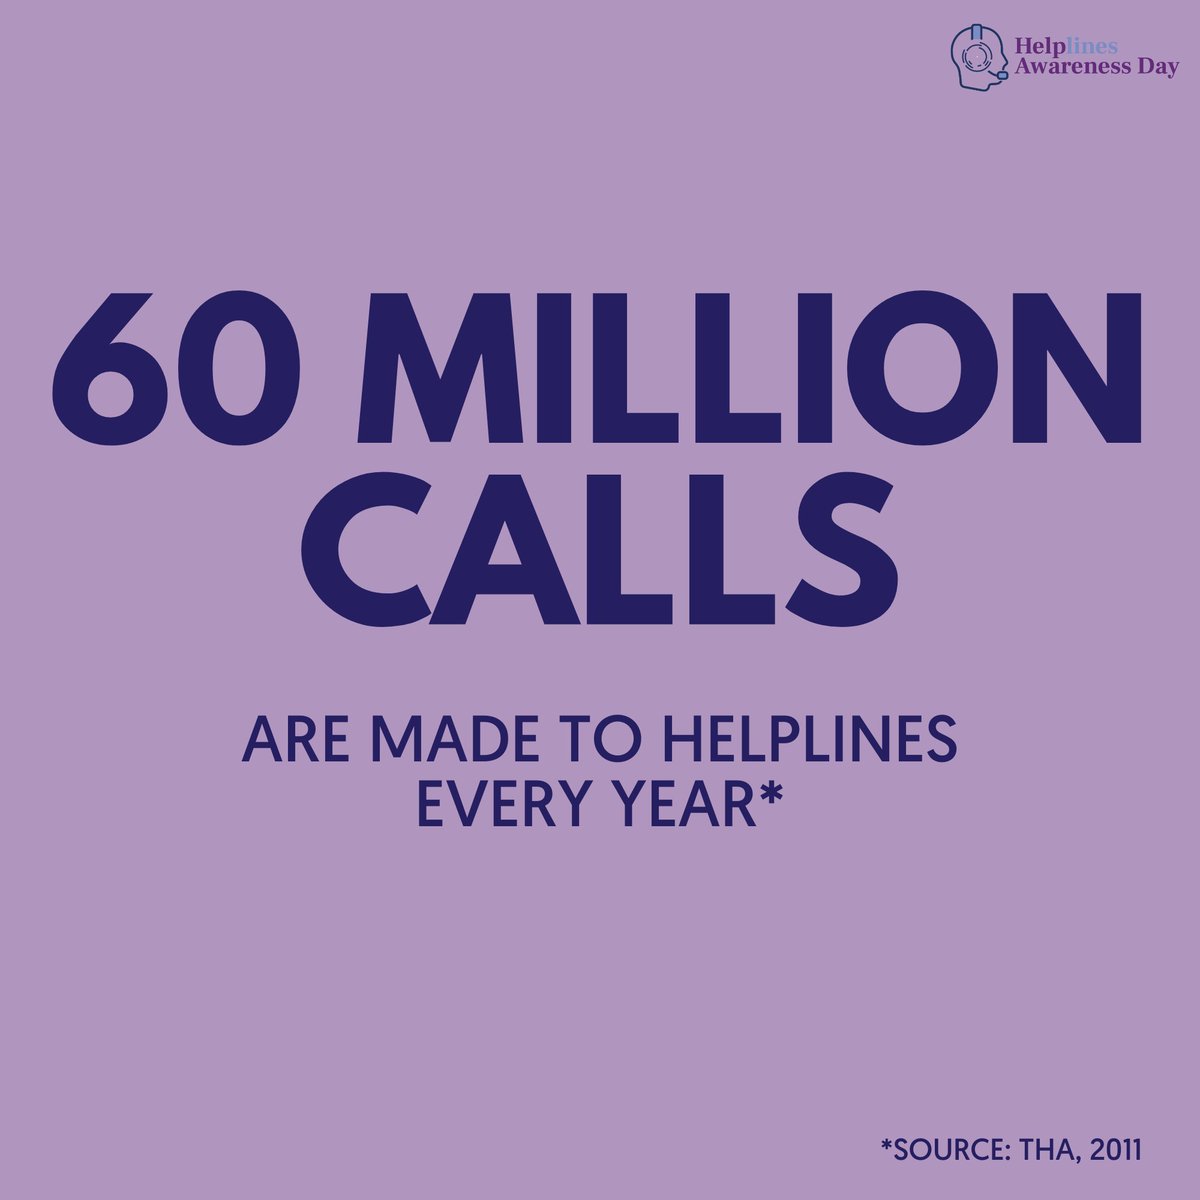 60m calls are made every year to helplines. Today we’re supporting England’s first ever Helplines Awareness Day recognising their outstanding work across the country. Find a dedicated helpline here: helplines.org/helplines/ #HelplinesAwarenessDay2023